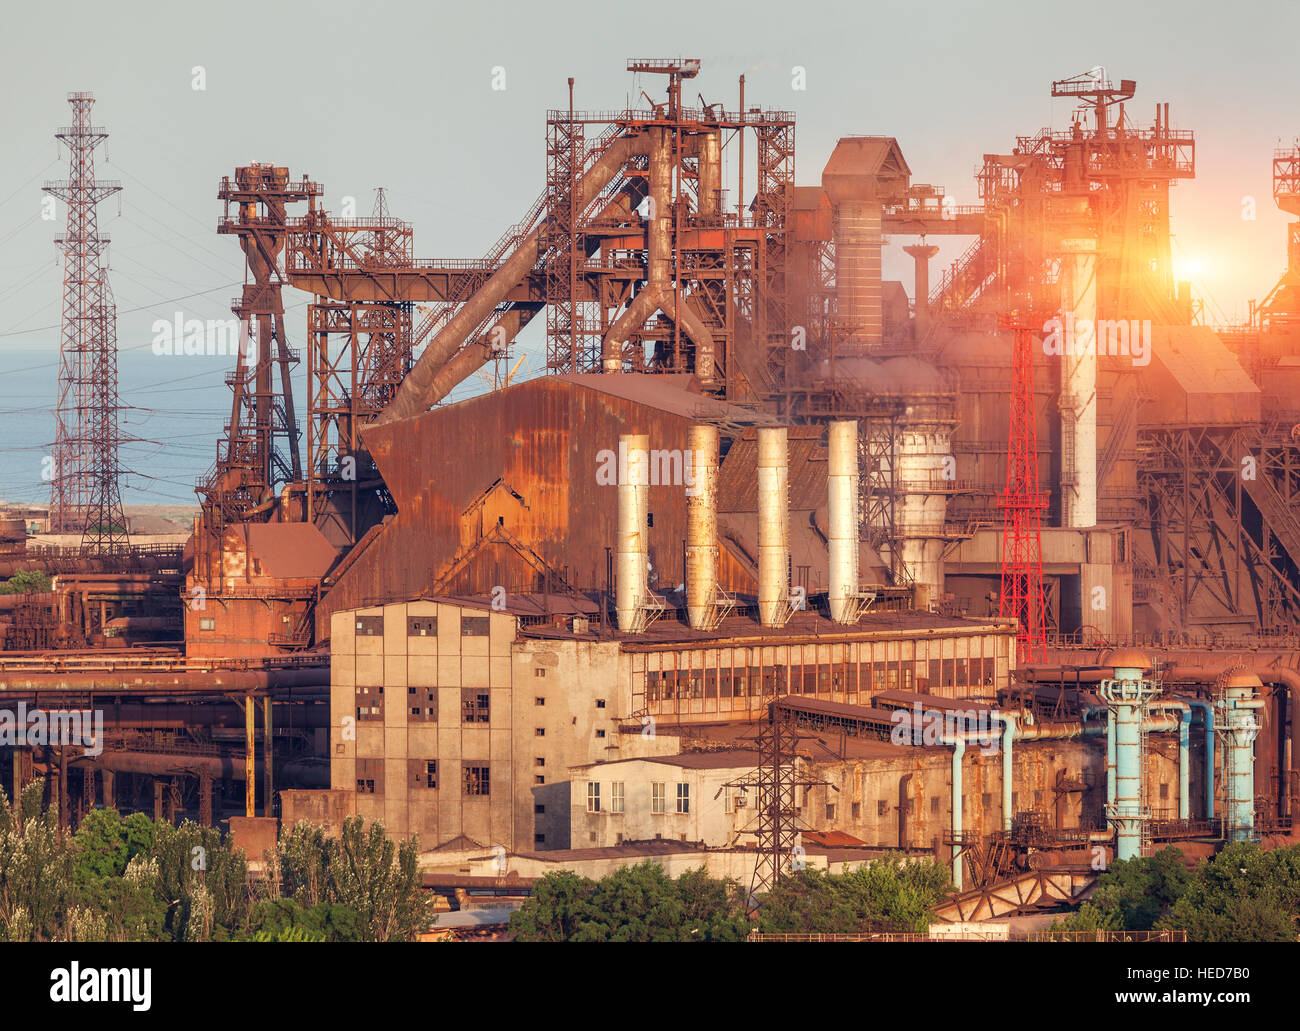 Metallurgical plant at colorful sunset. Industrial landscape. Steel factory in the city. Steel works, iron works. Heavy industry Stock Photo